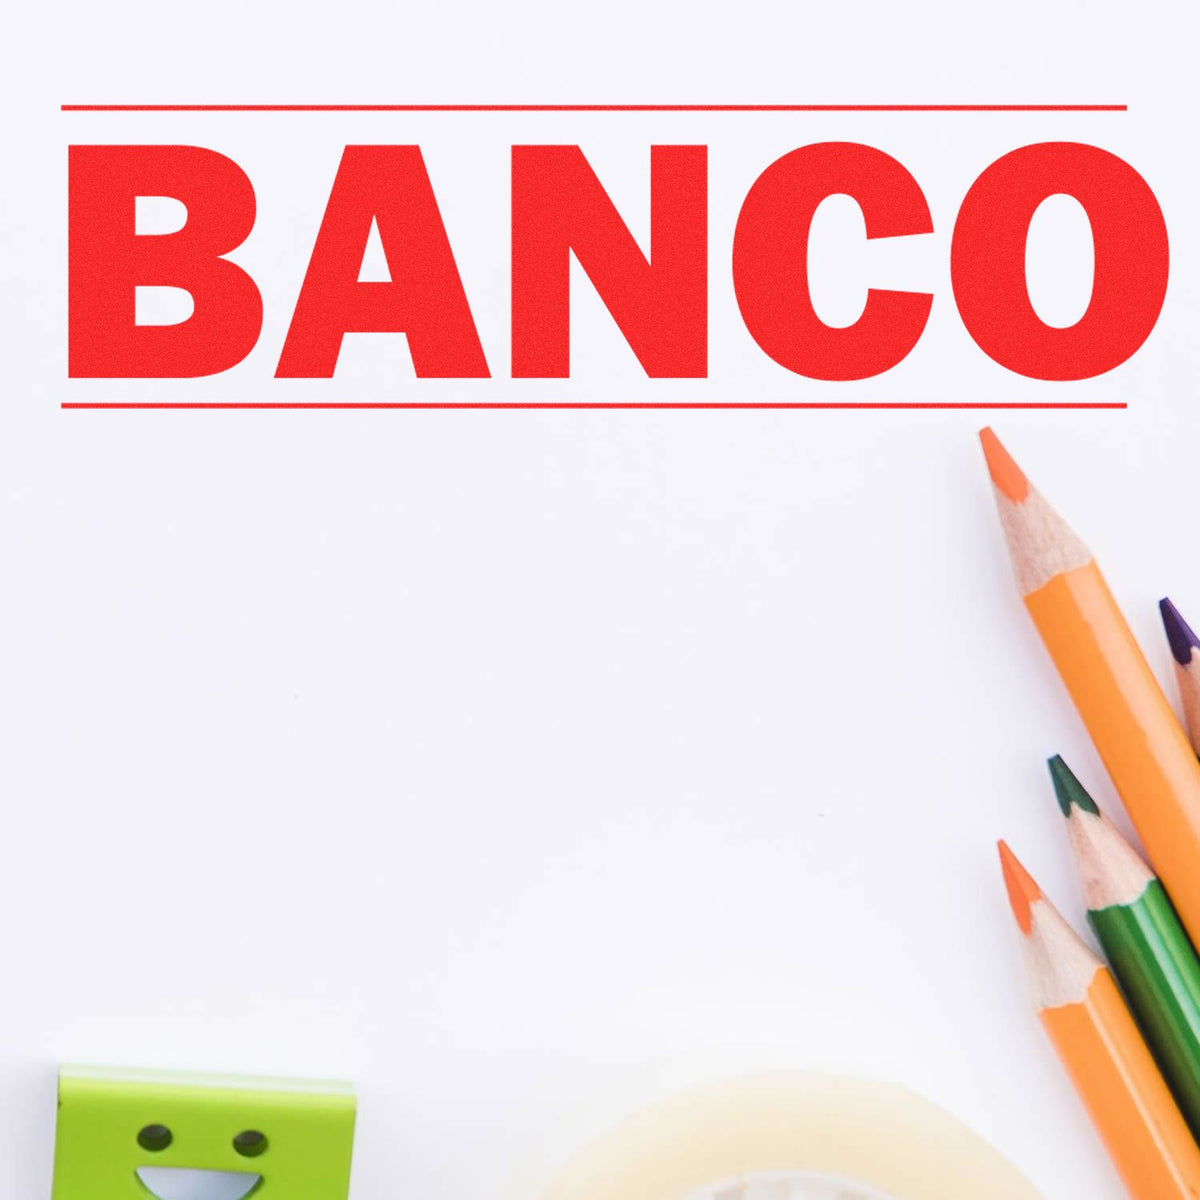 Large Self-Inking Bold Banco Stamp In Use Photo